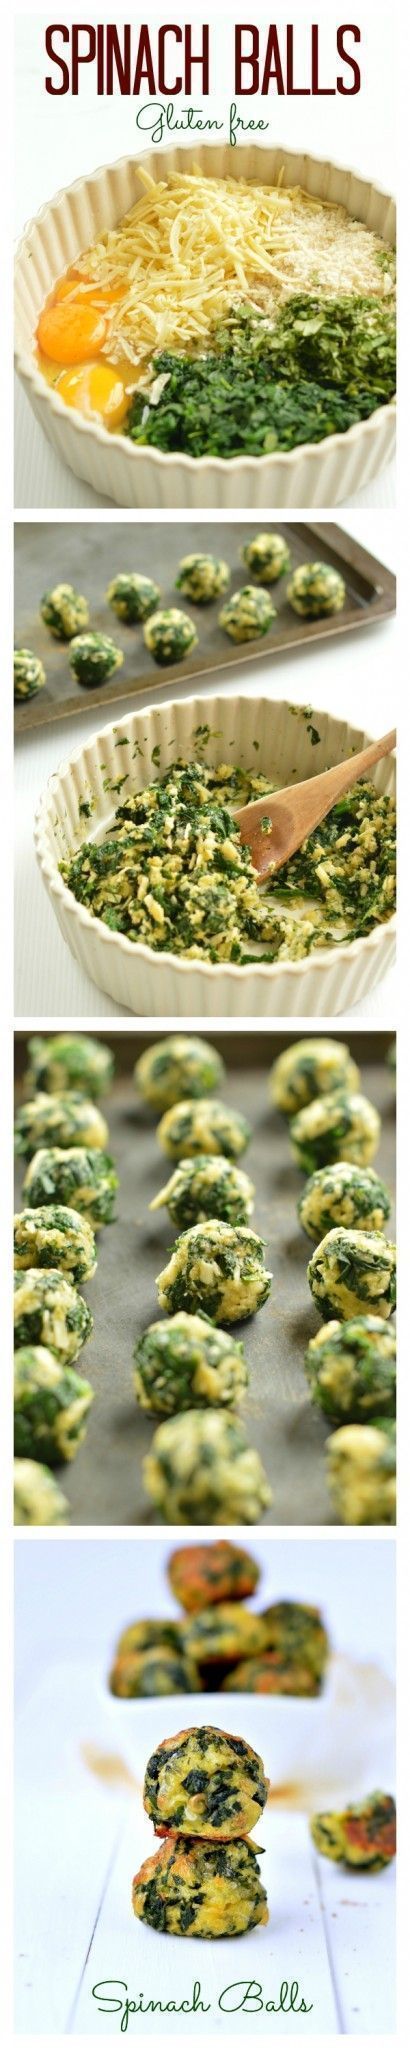 Spinach balls | clean eating spinach recipes | clean eating appetizers | spinach finger foods healthy